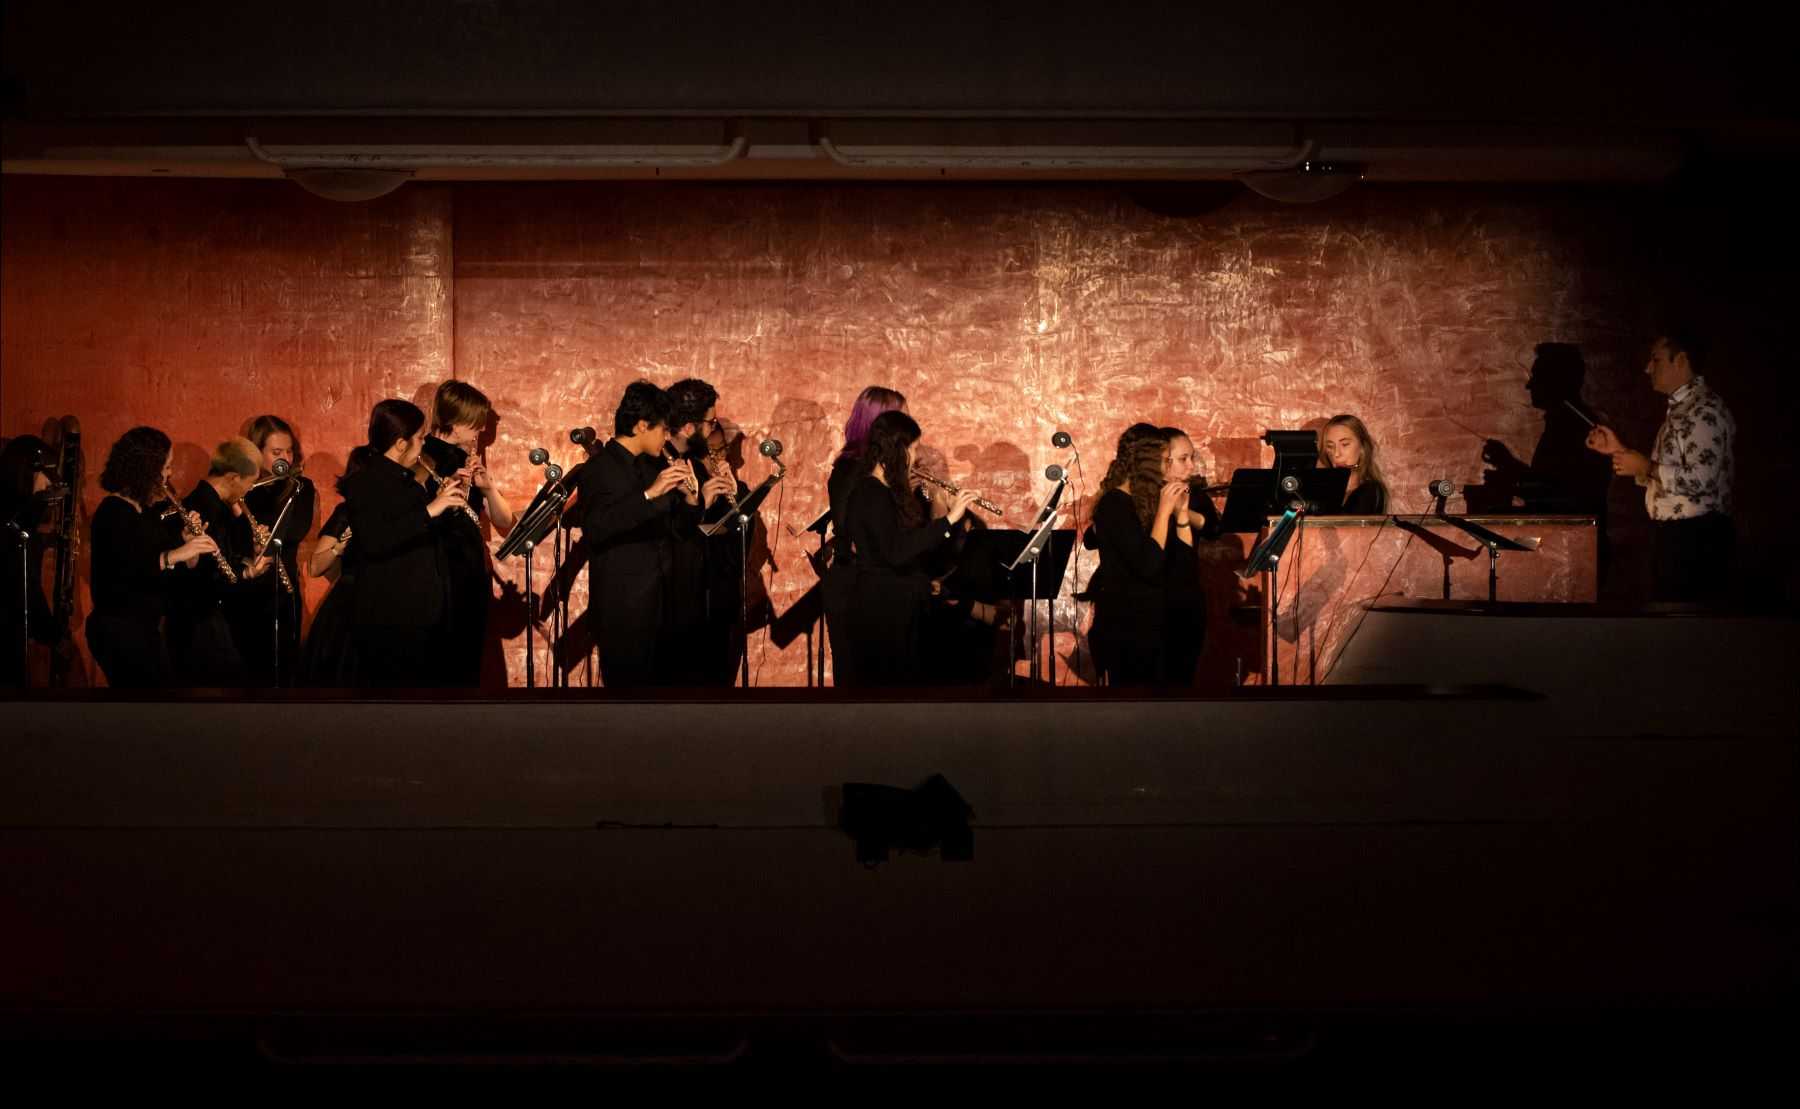 The Flute Ensemble performs in the balcony of the Fox Cities Performing Arts Center during Kaleidoscope.